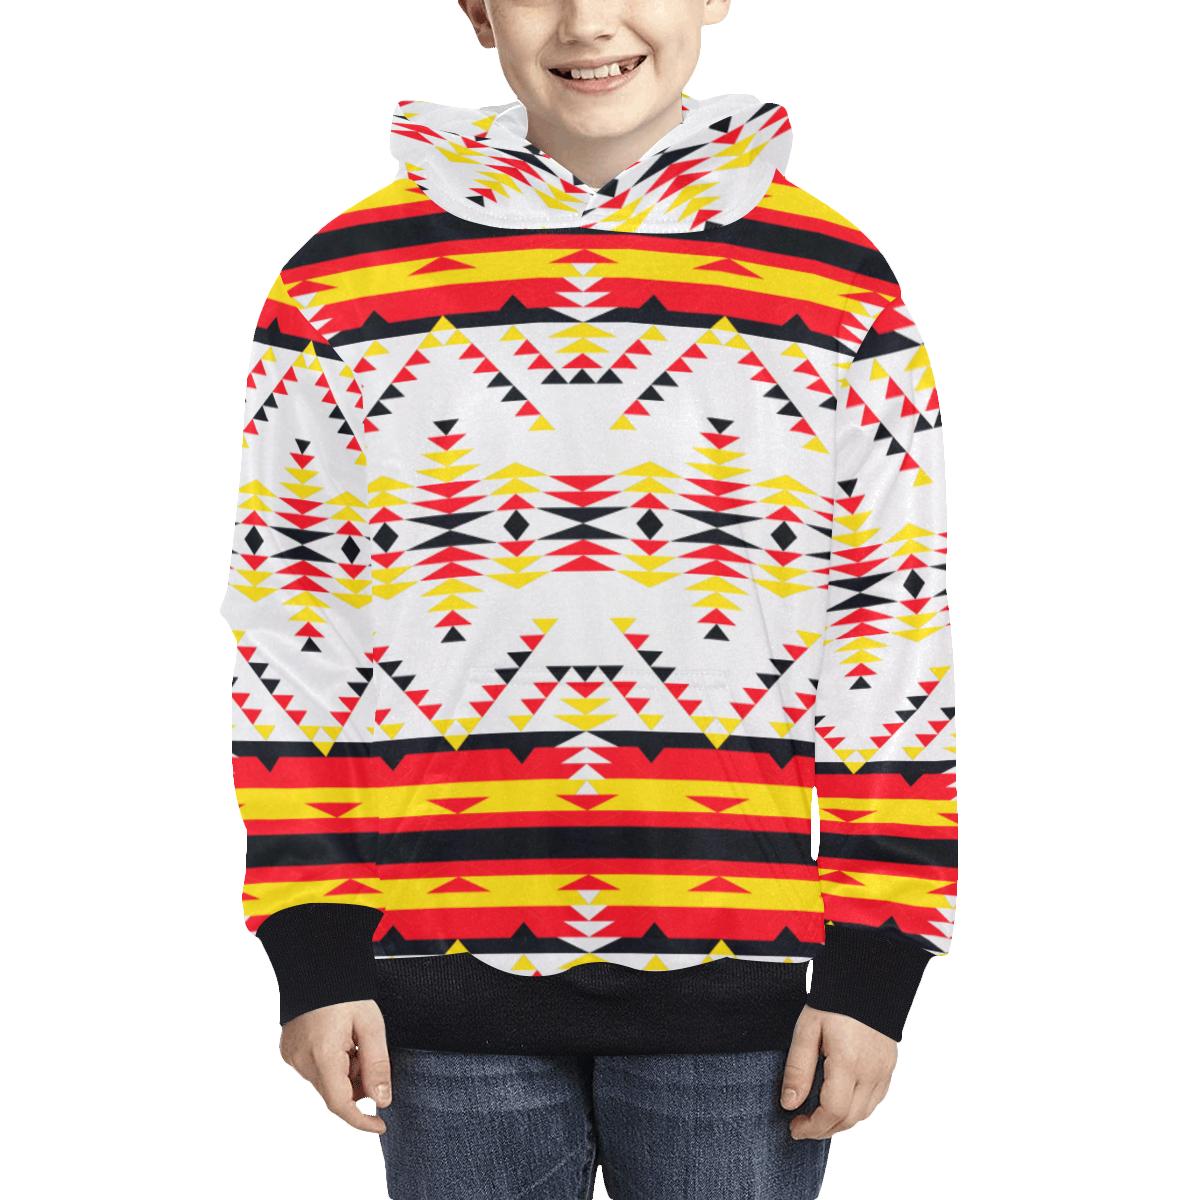 Visions of Peace Directions Kids' All Over Print Hoodie (Model H38) Kids' AOP Hoodie (H38) e-joyer 